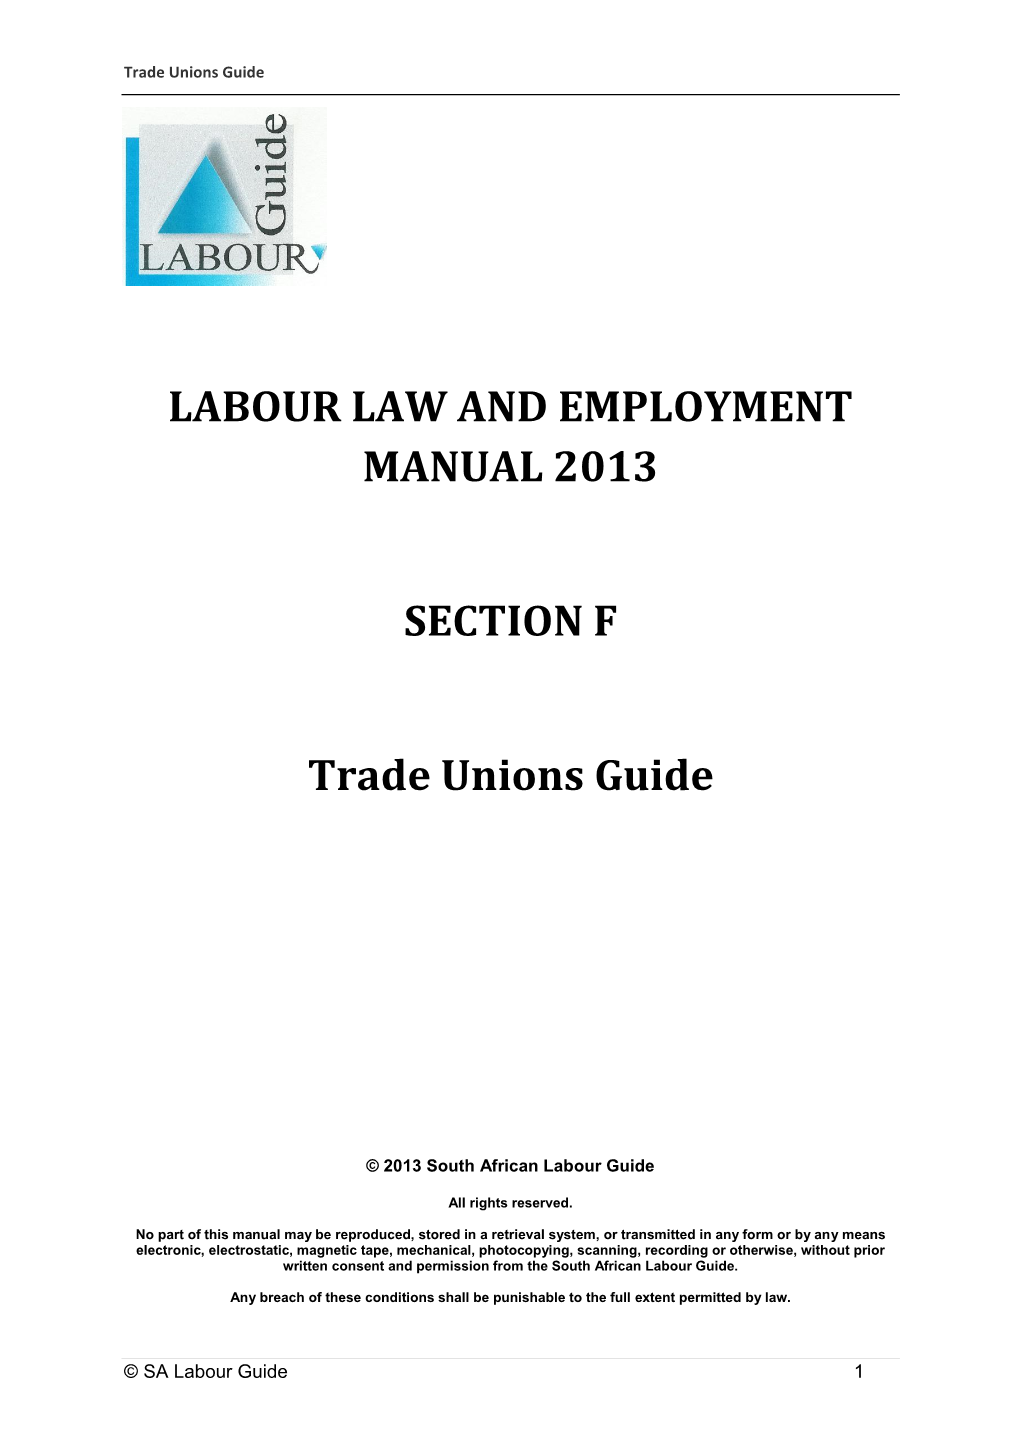 LABOUR LAW and EMPLOYMENT MANUAL 2013 SECTION F Trade Unions Guide